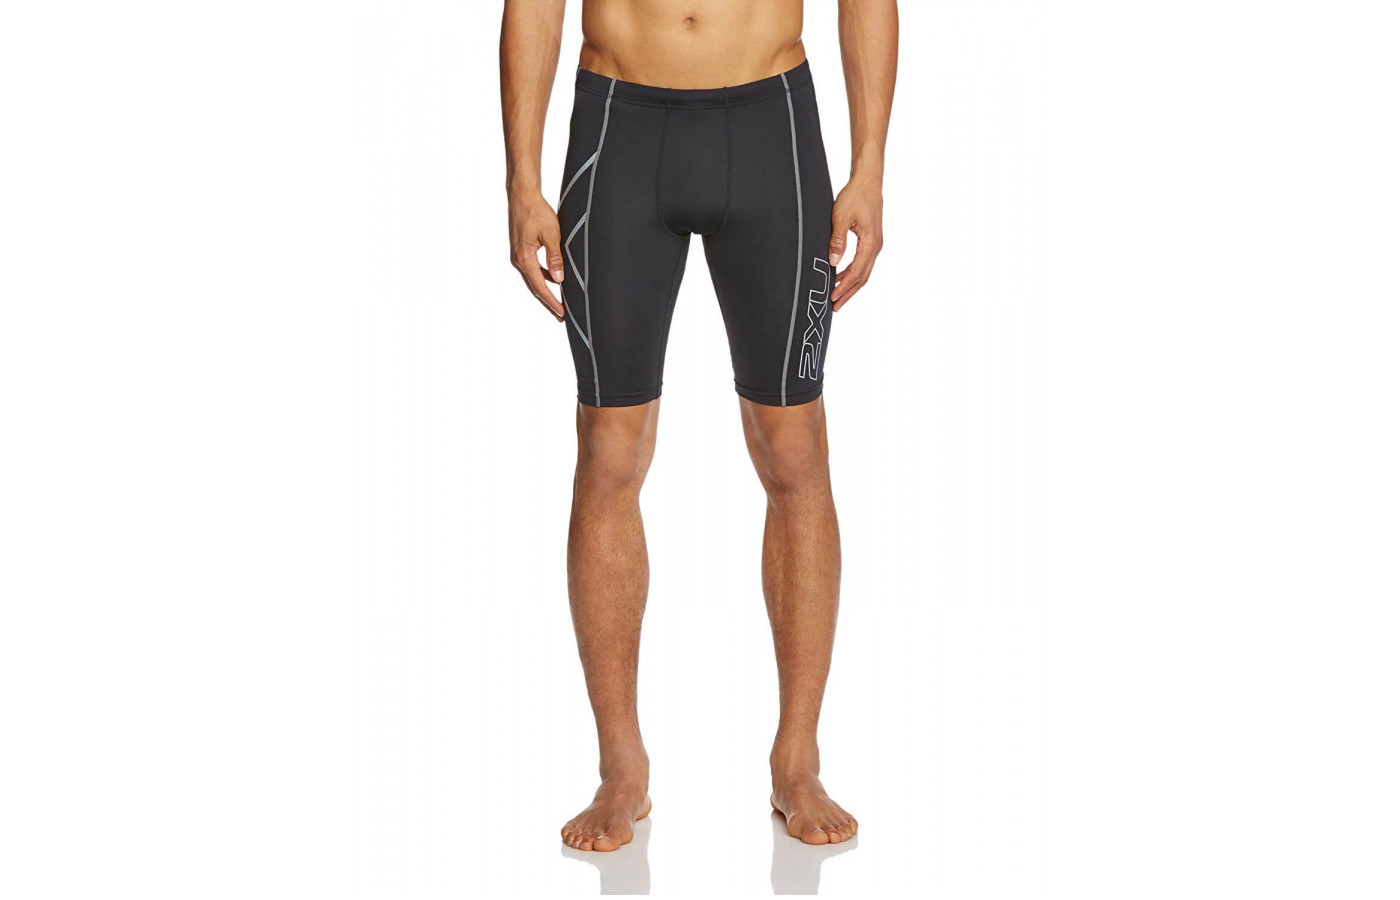 The 2XU Compression Shorts can wick away moisture to prevent skin irritation.